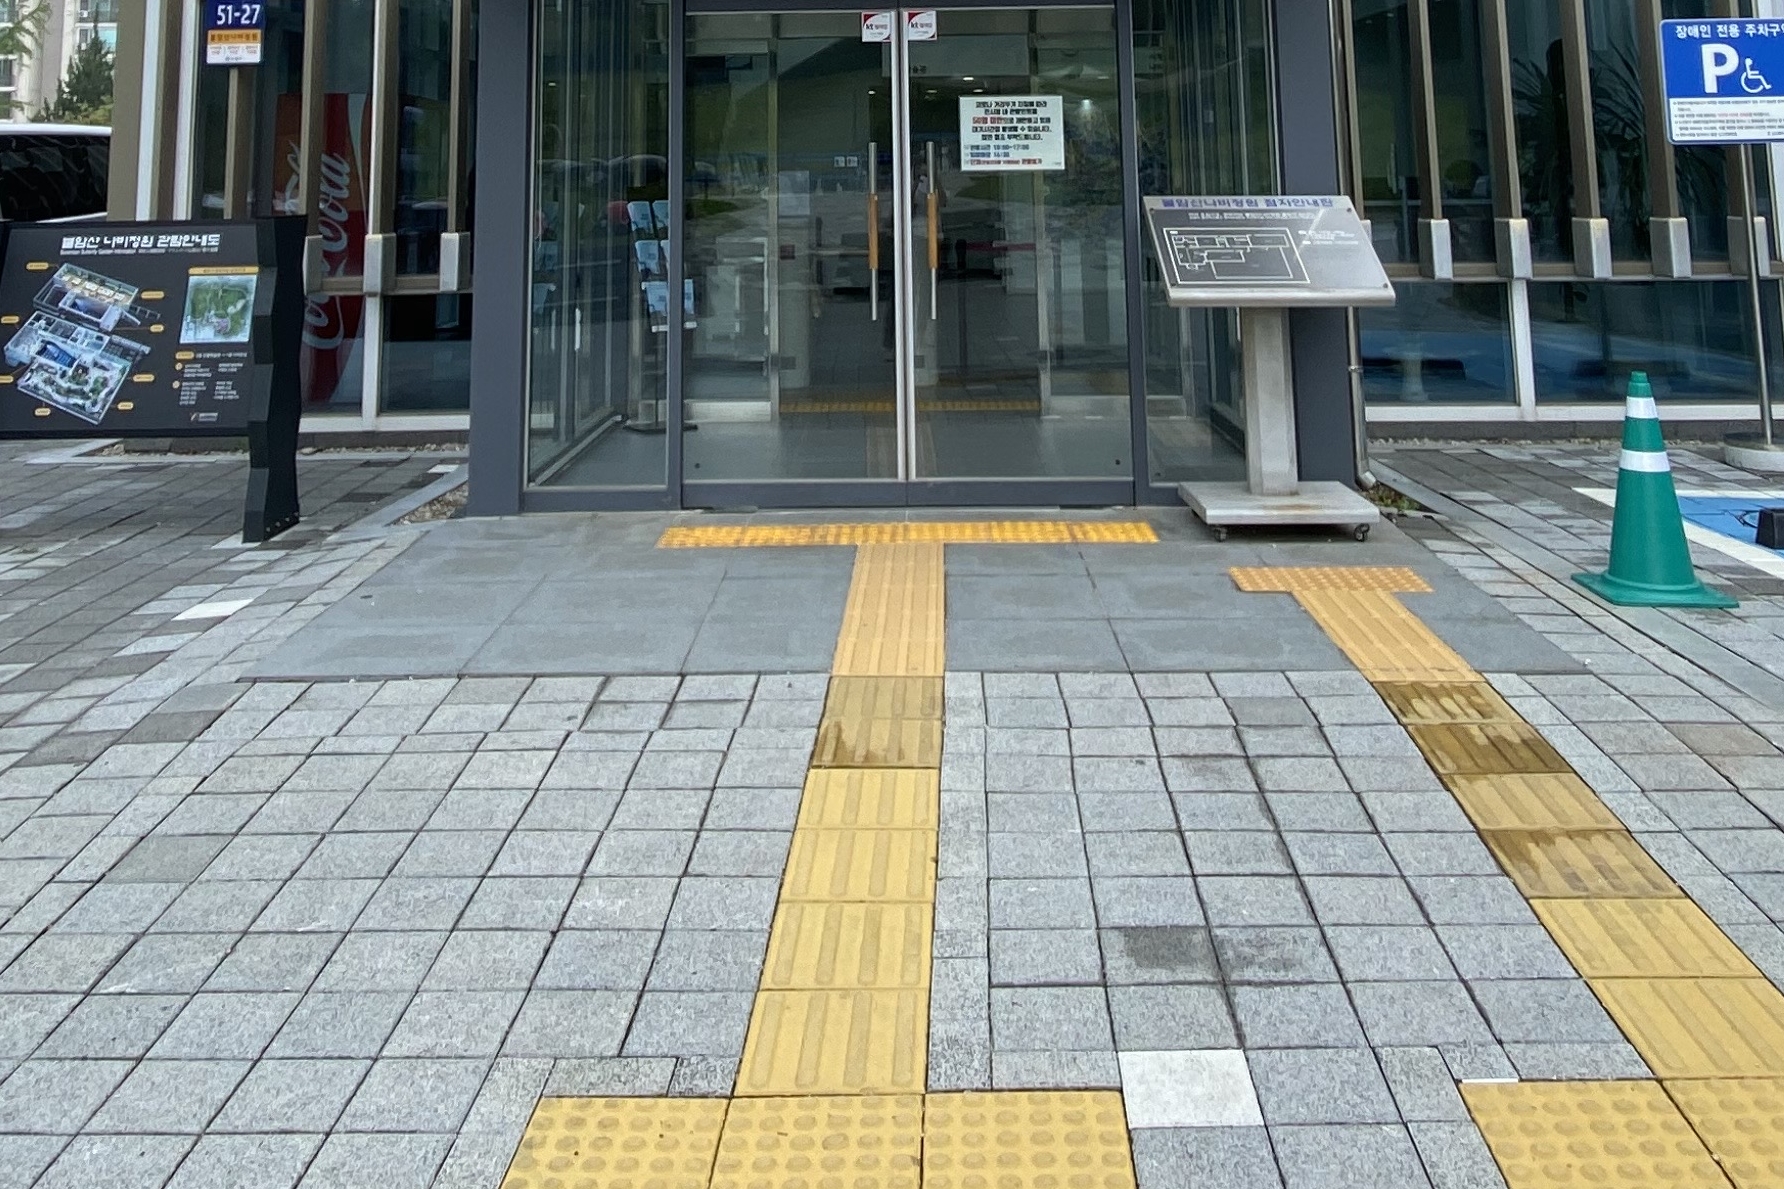 Entryway and Main entrance0 : Main entrance of Buramsan Butterfly Garden with flat floor and tactile paving